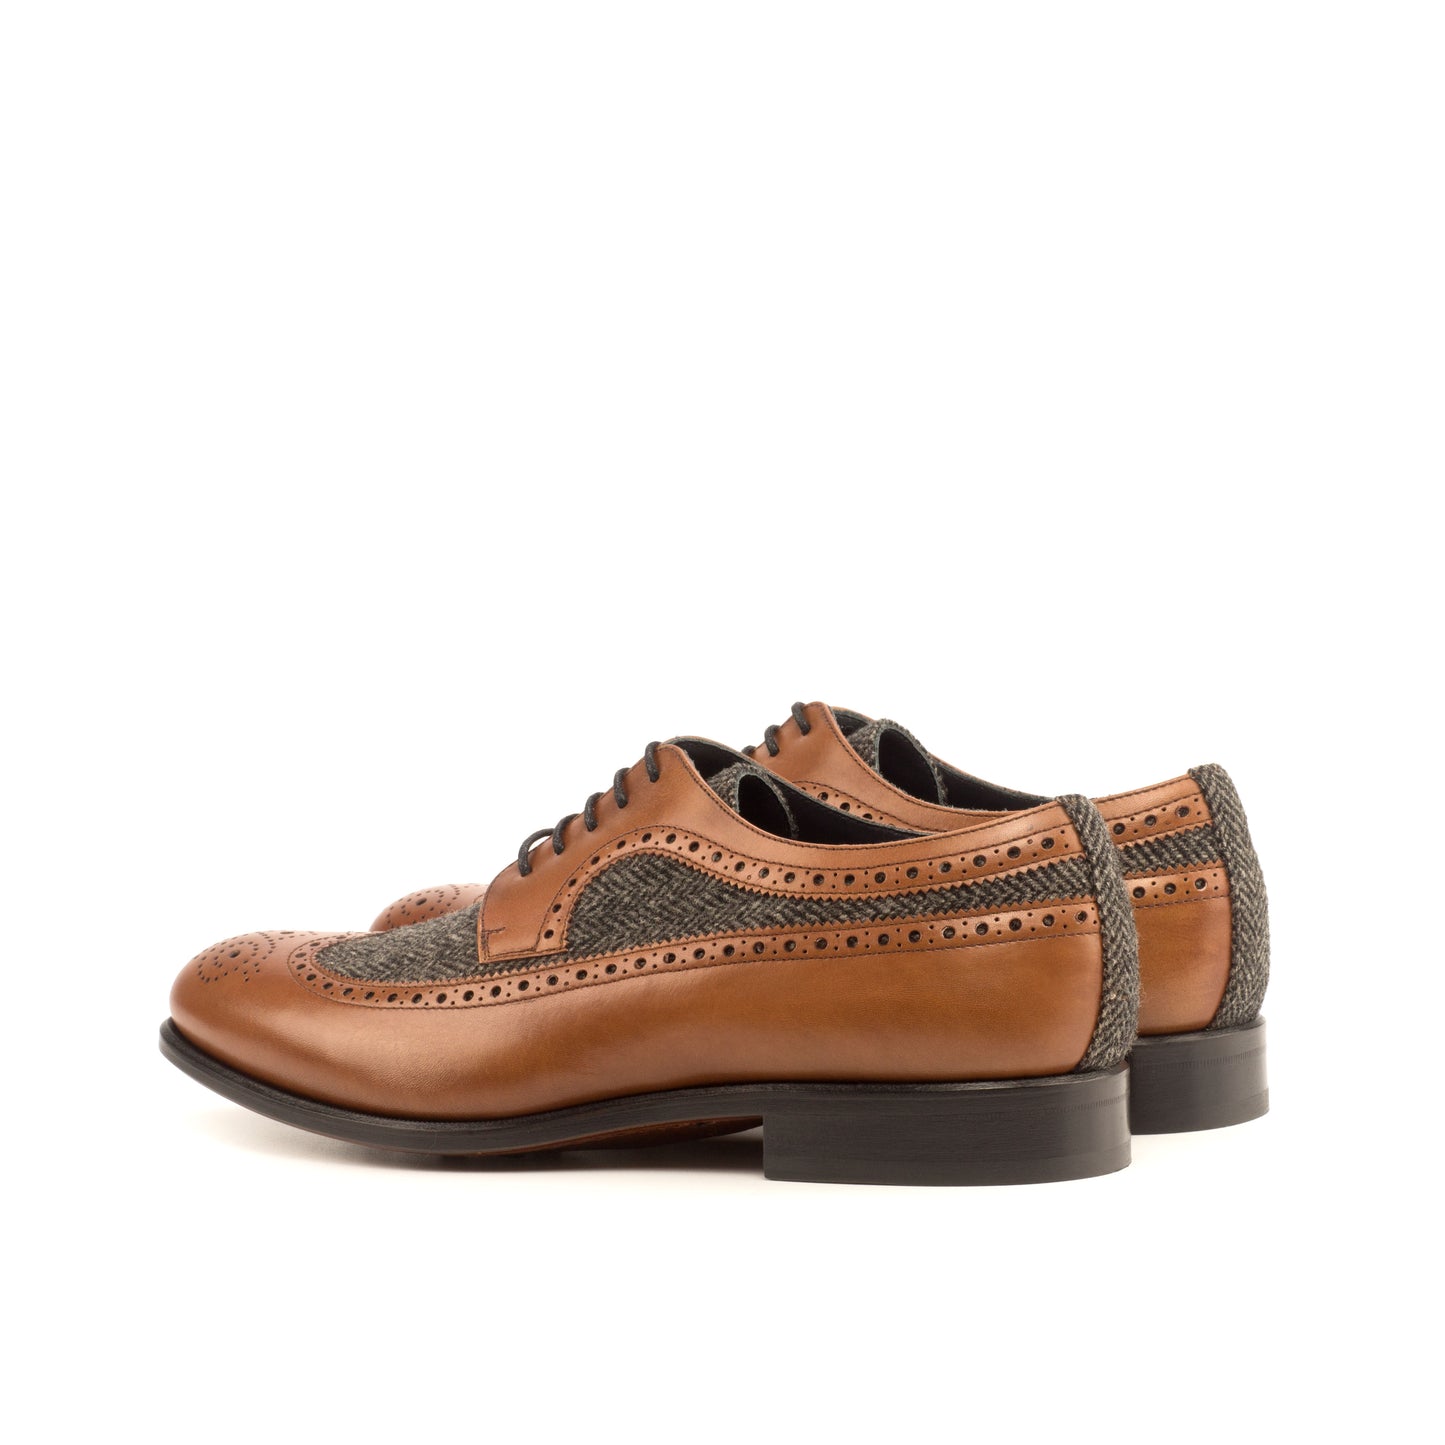 SUITCAFE Longwing Blucher Lace Up Men's Shoe In Cognac Leather